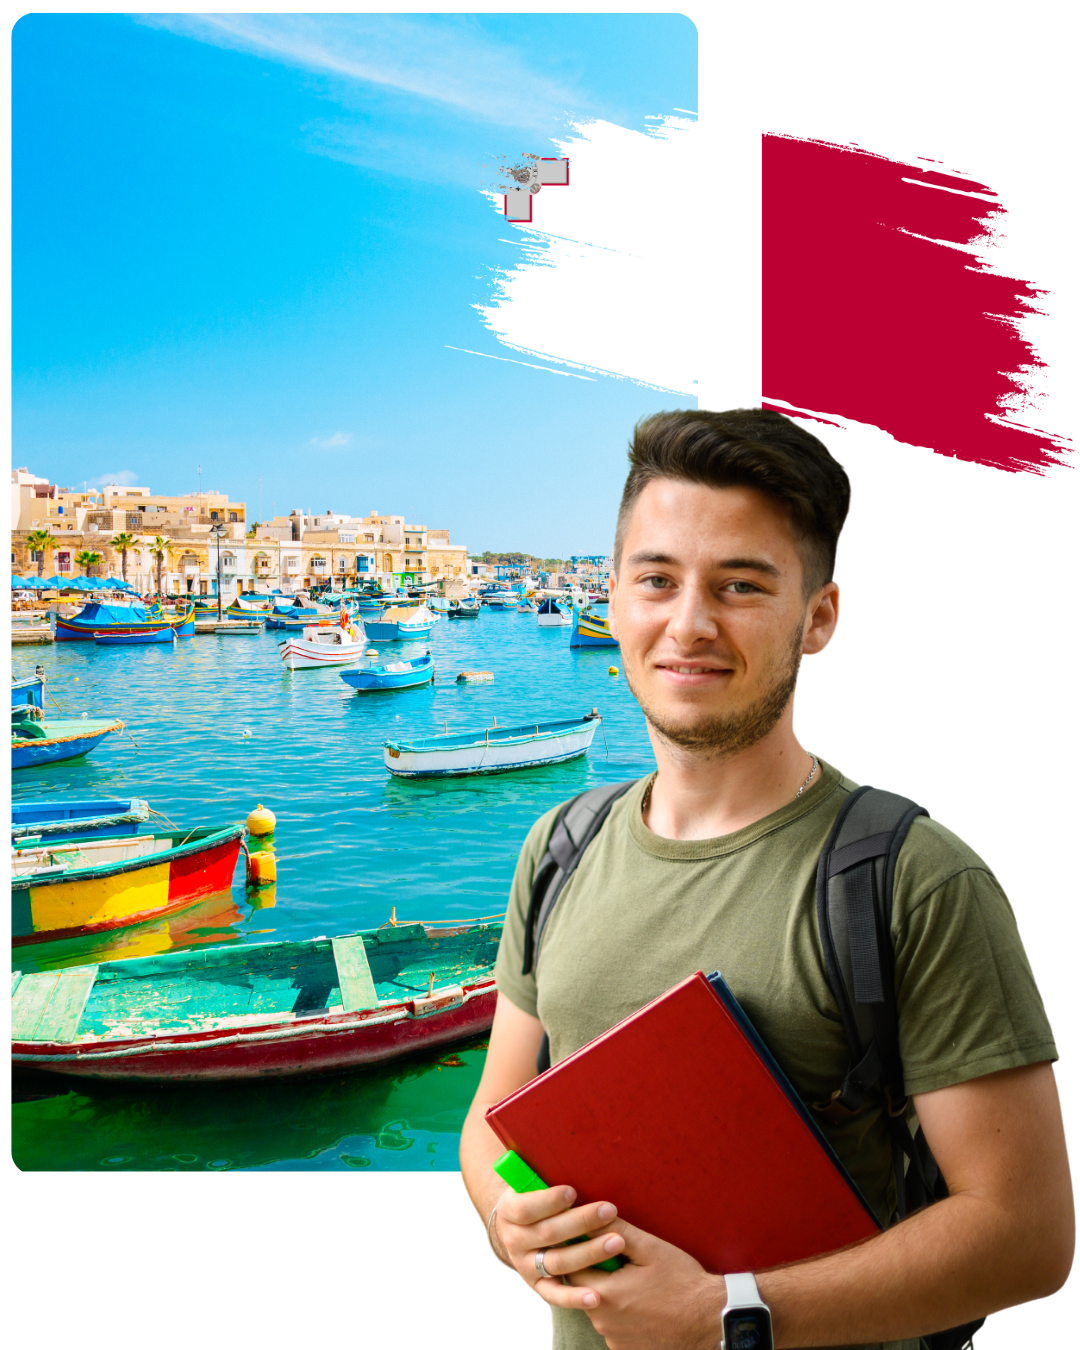 A student looking forward to study in Malta